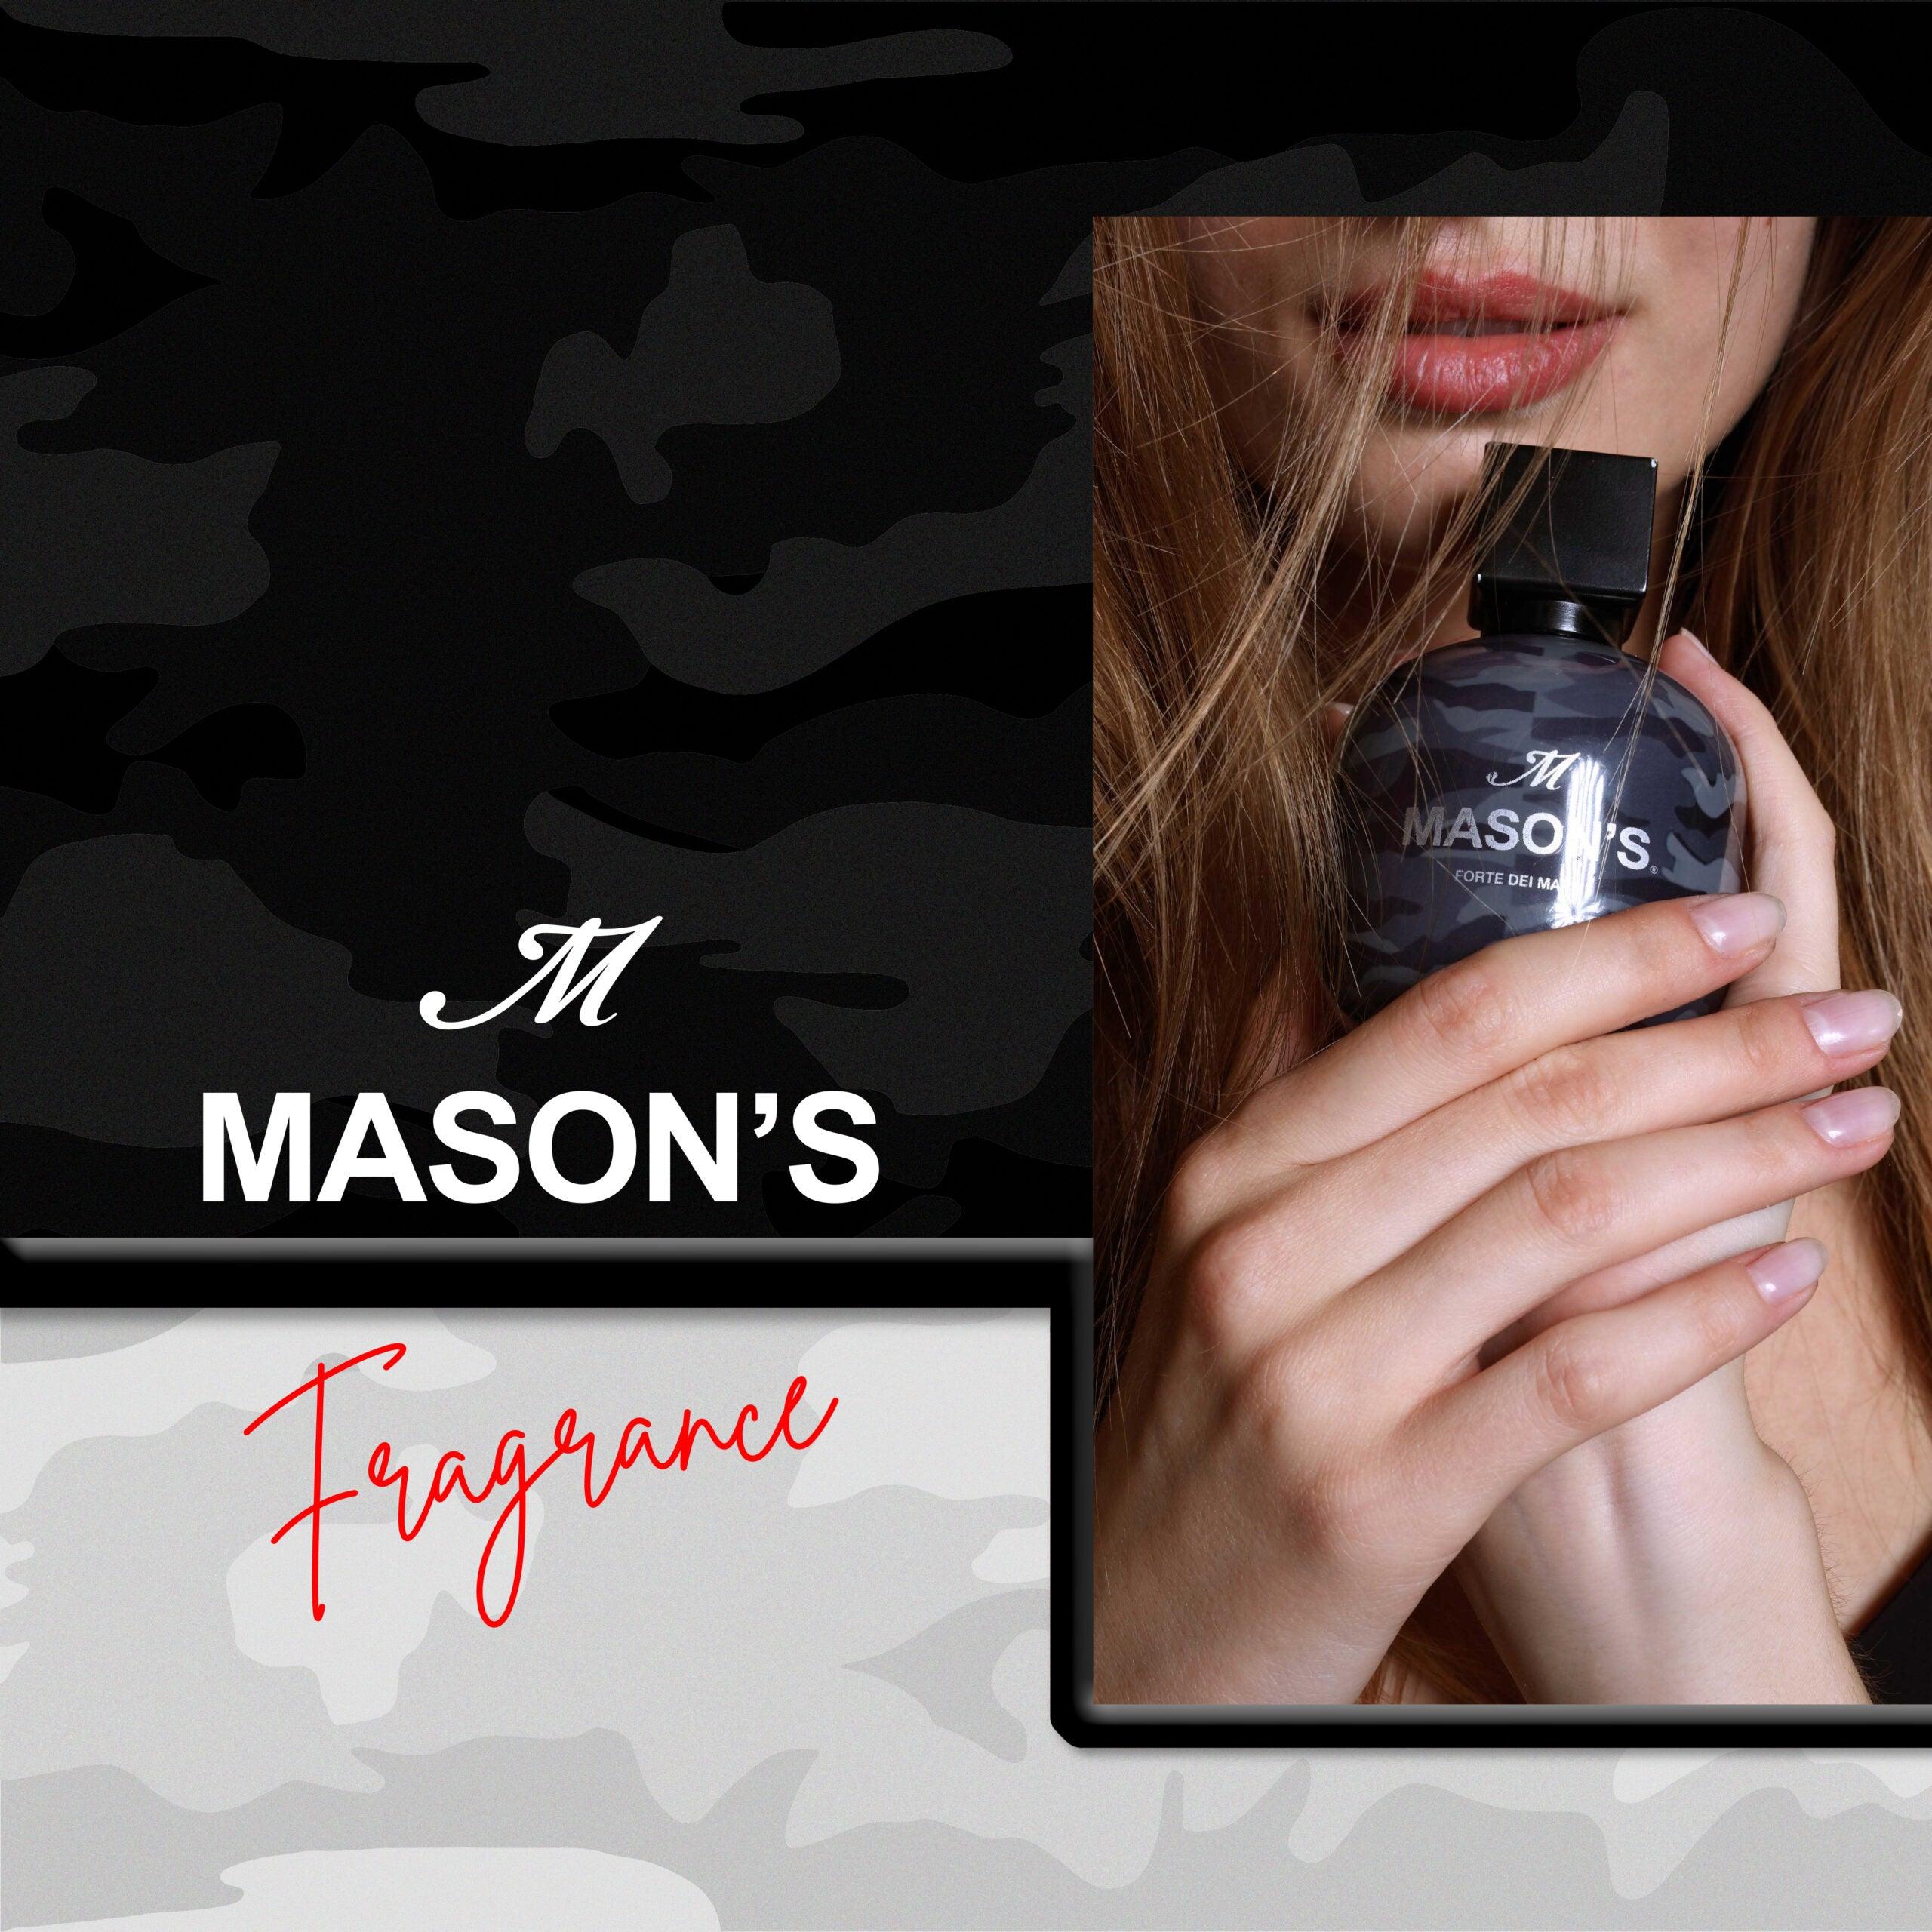 Discover the sublime fragrances of the Mason's Beauty line